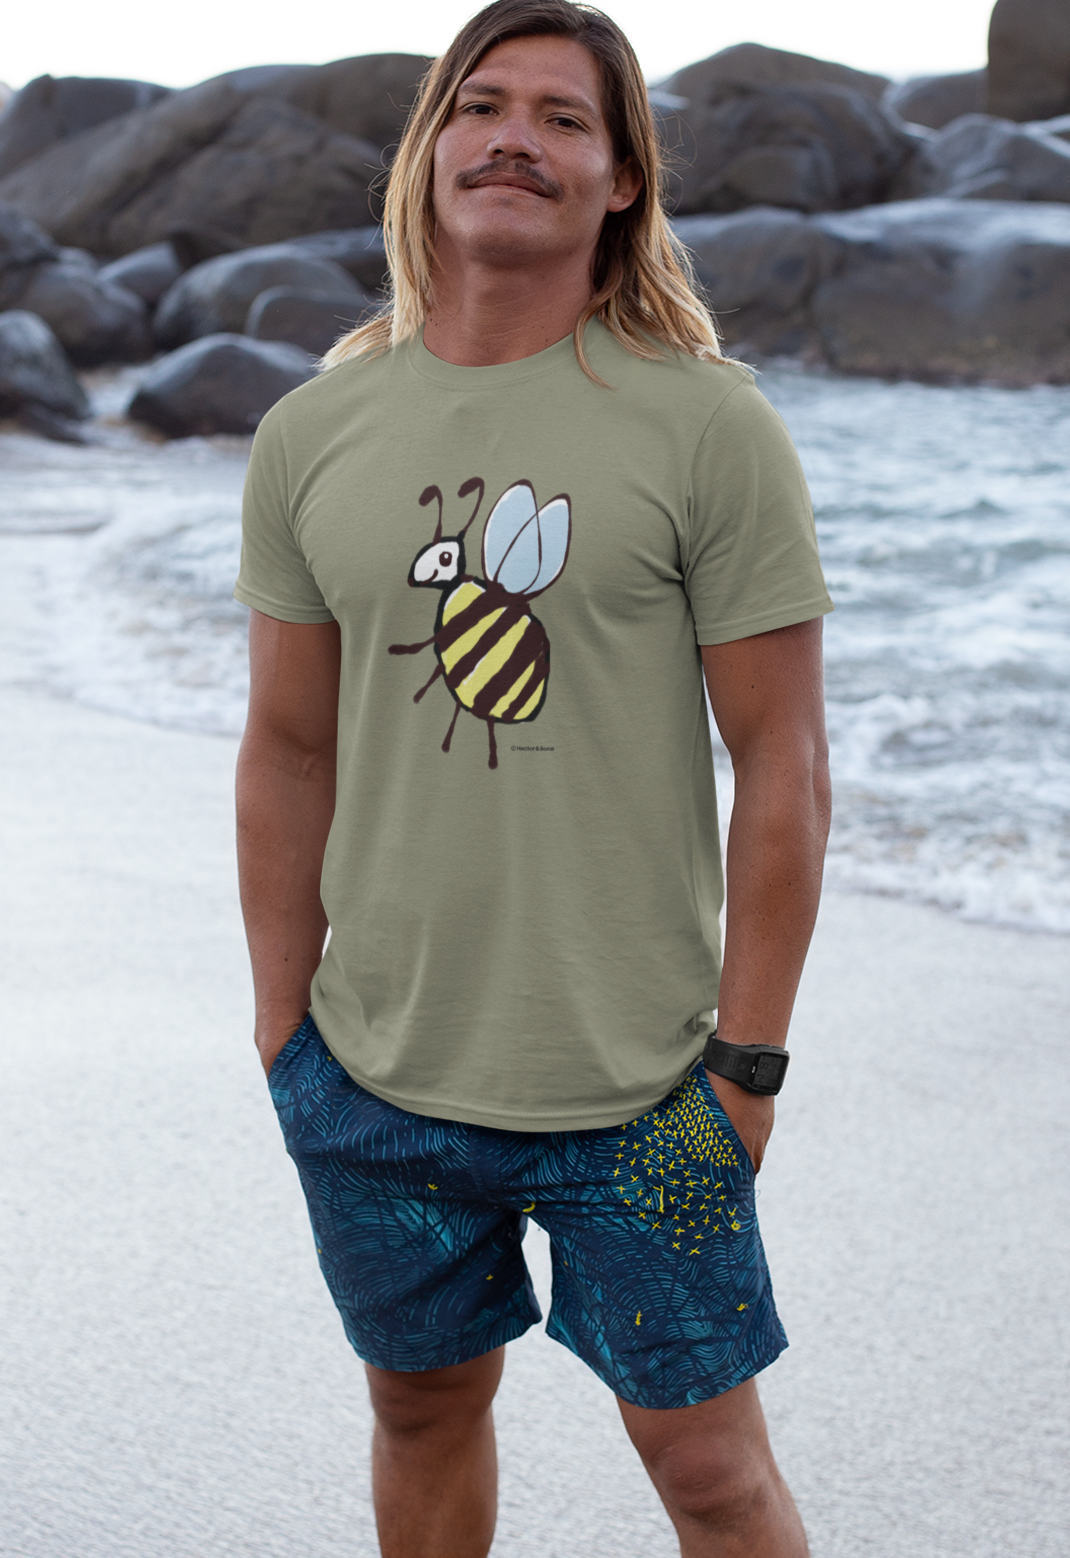 Bee T-shirt - Young man on beach wearing a cute Busy Bee illustrated heather grey vegan cotton t-shirts by Hector and Bone